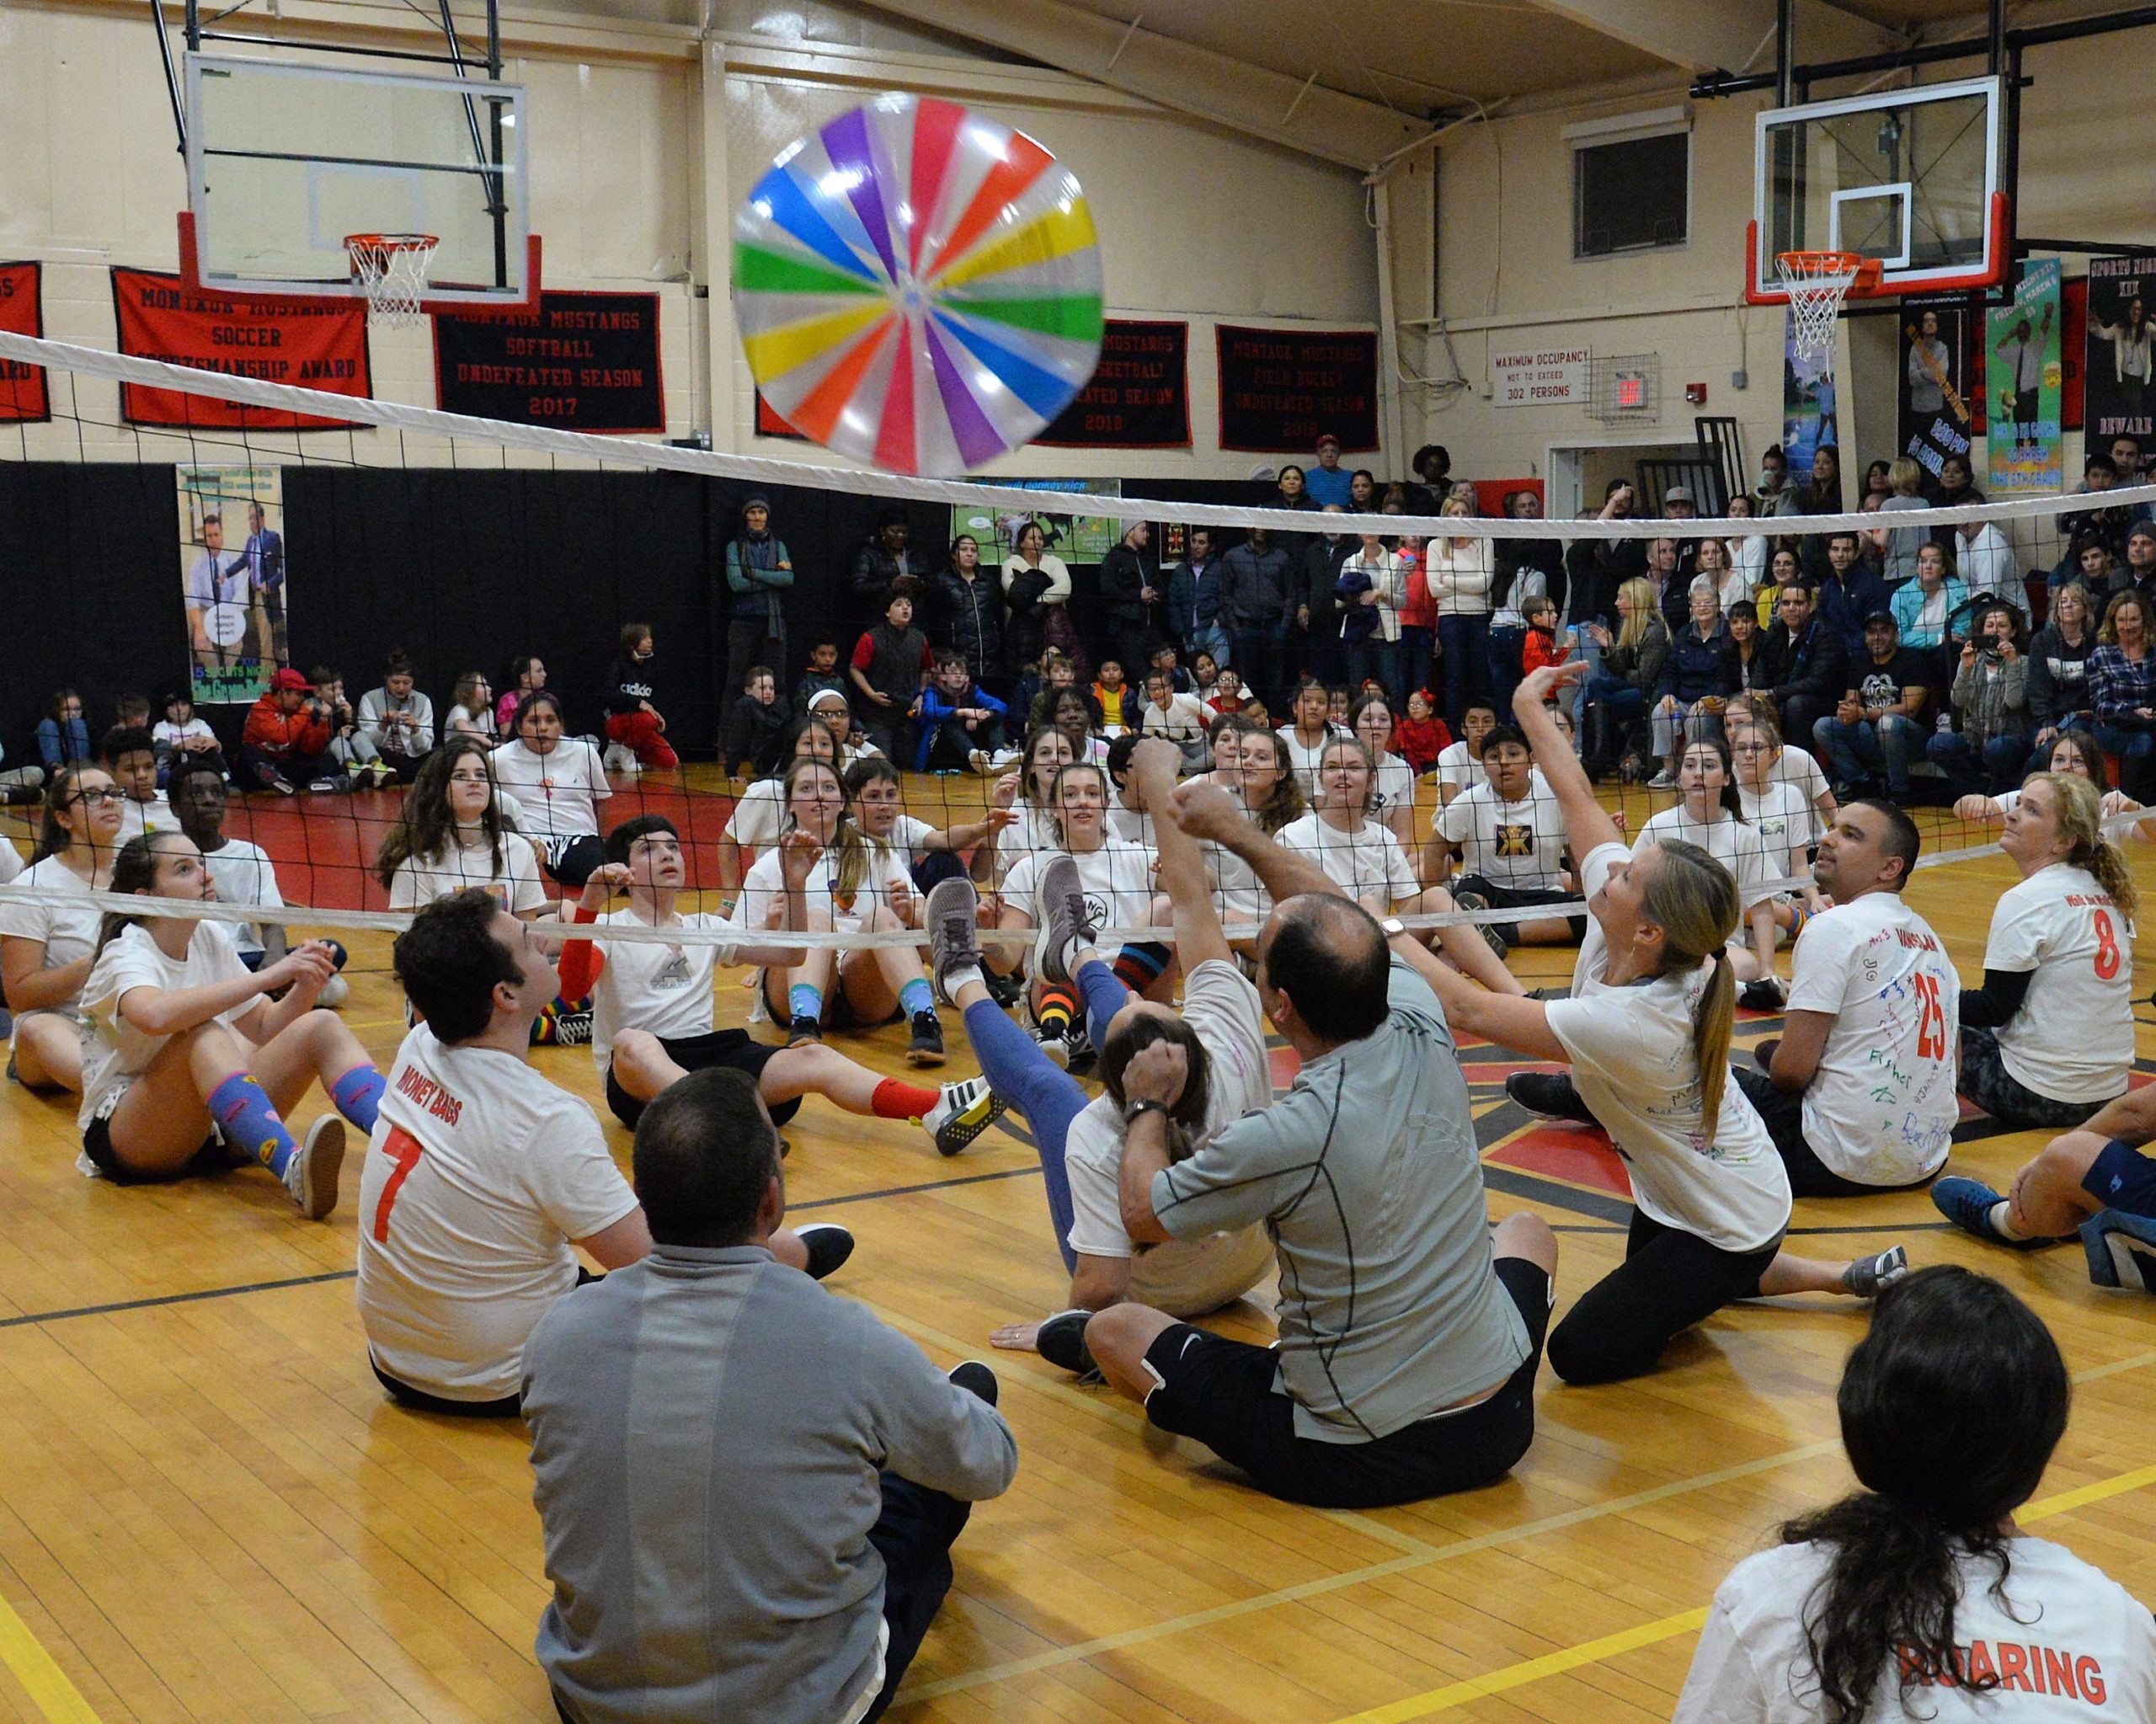 Montauk School held its Sports Night on Friday, during which teachers and eighth grade students competed in a variety of contests before a packed house of cheering students and parents. KYRIL BROMLEY 